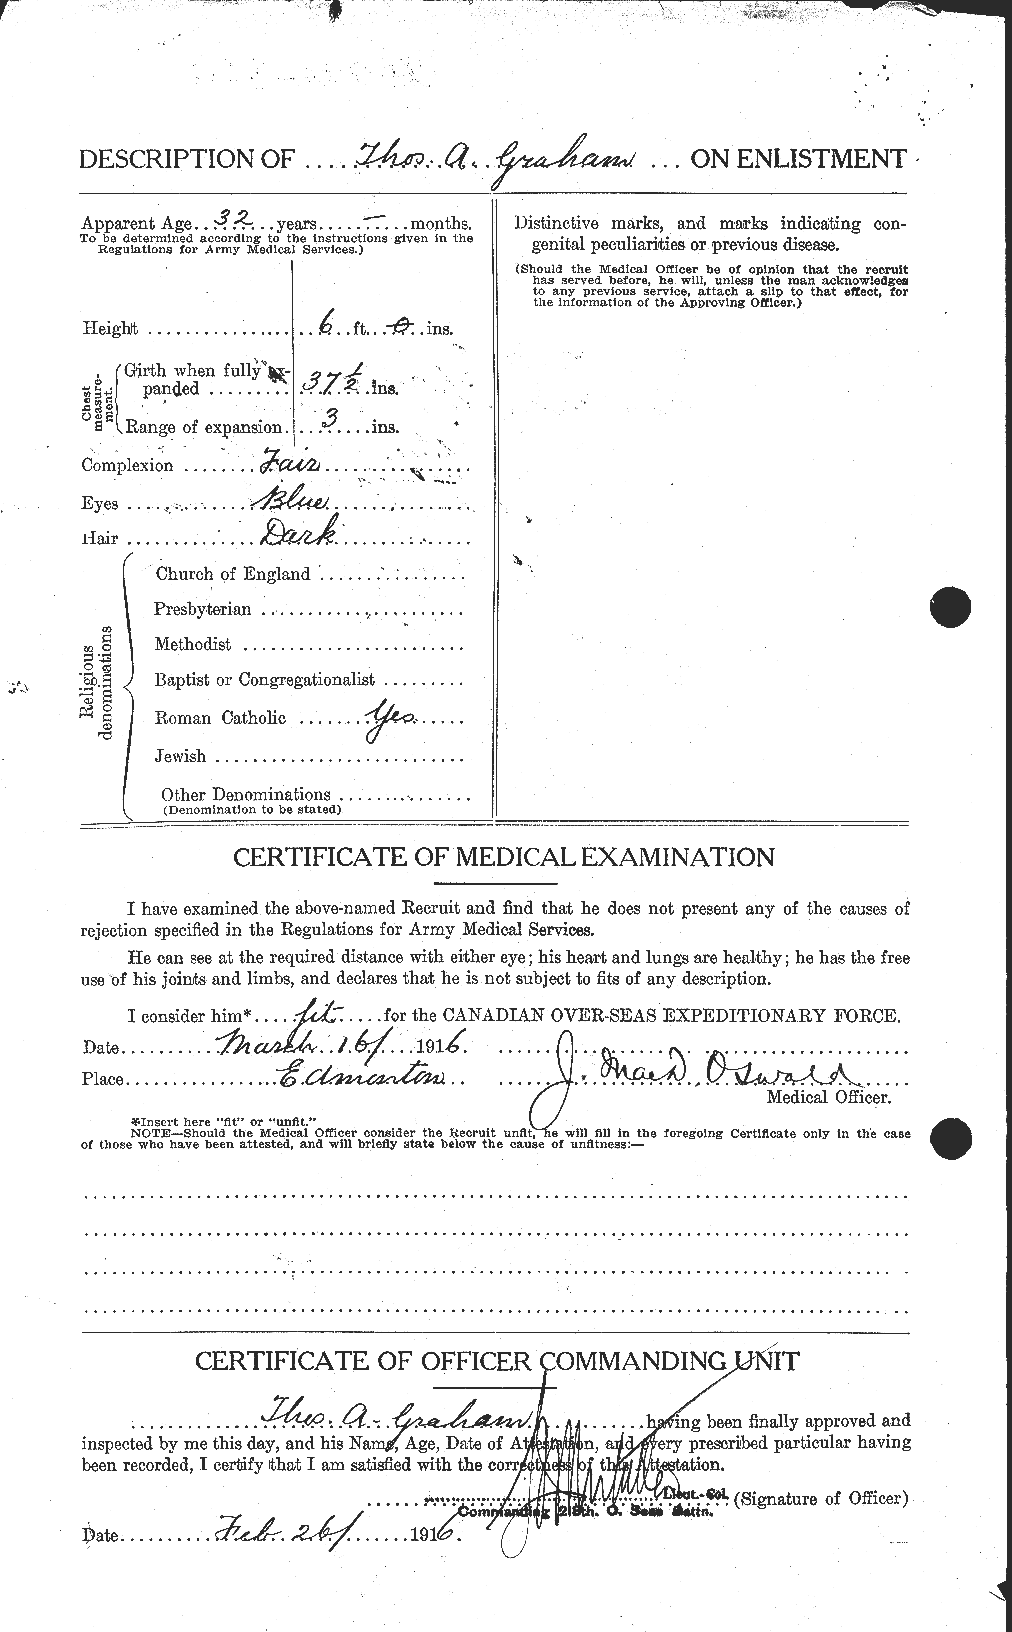 Personnel Records of the First World War - CEF 359509b